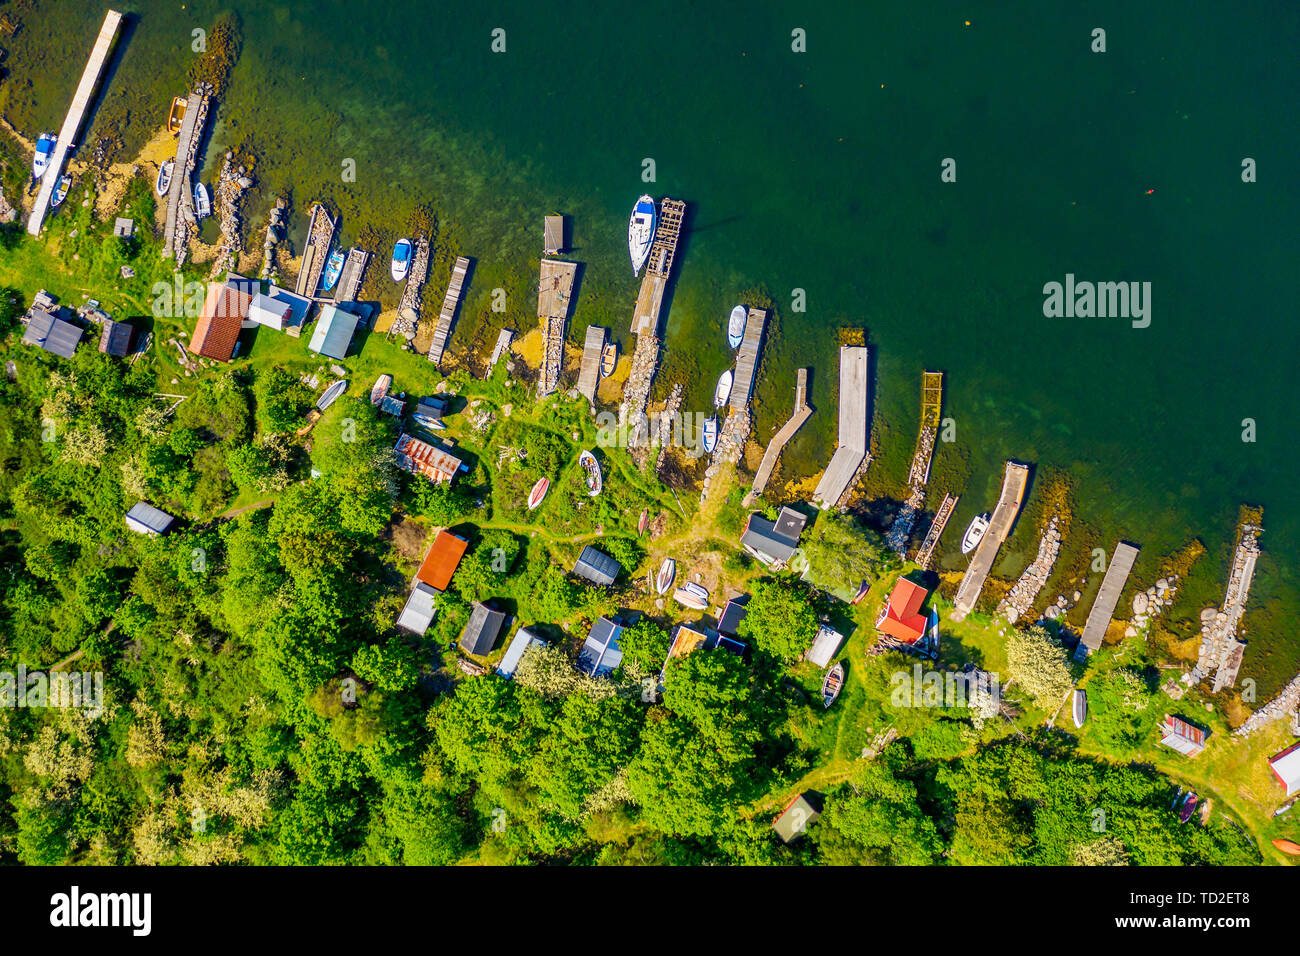 Straight down aerial of landscape full of small jetties, sheds and boats. Location Hasslo island in Blekinge archipelago, Sweden. Stock Photo